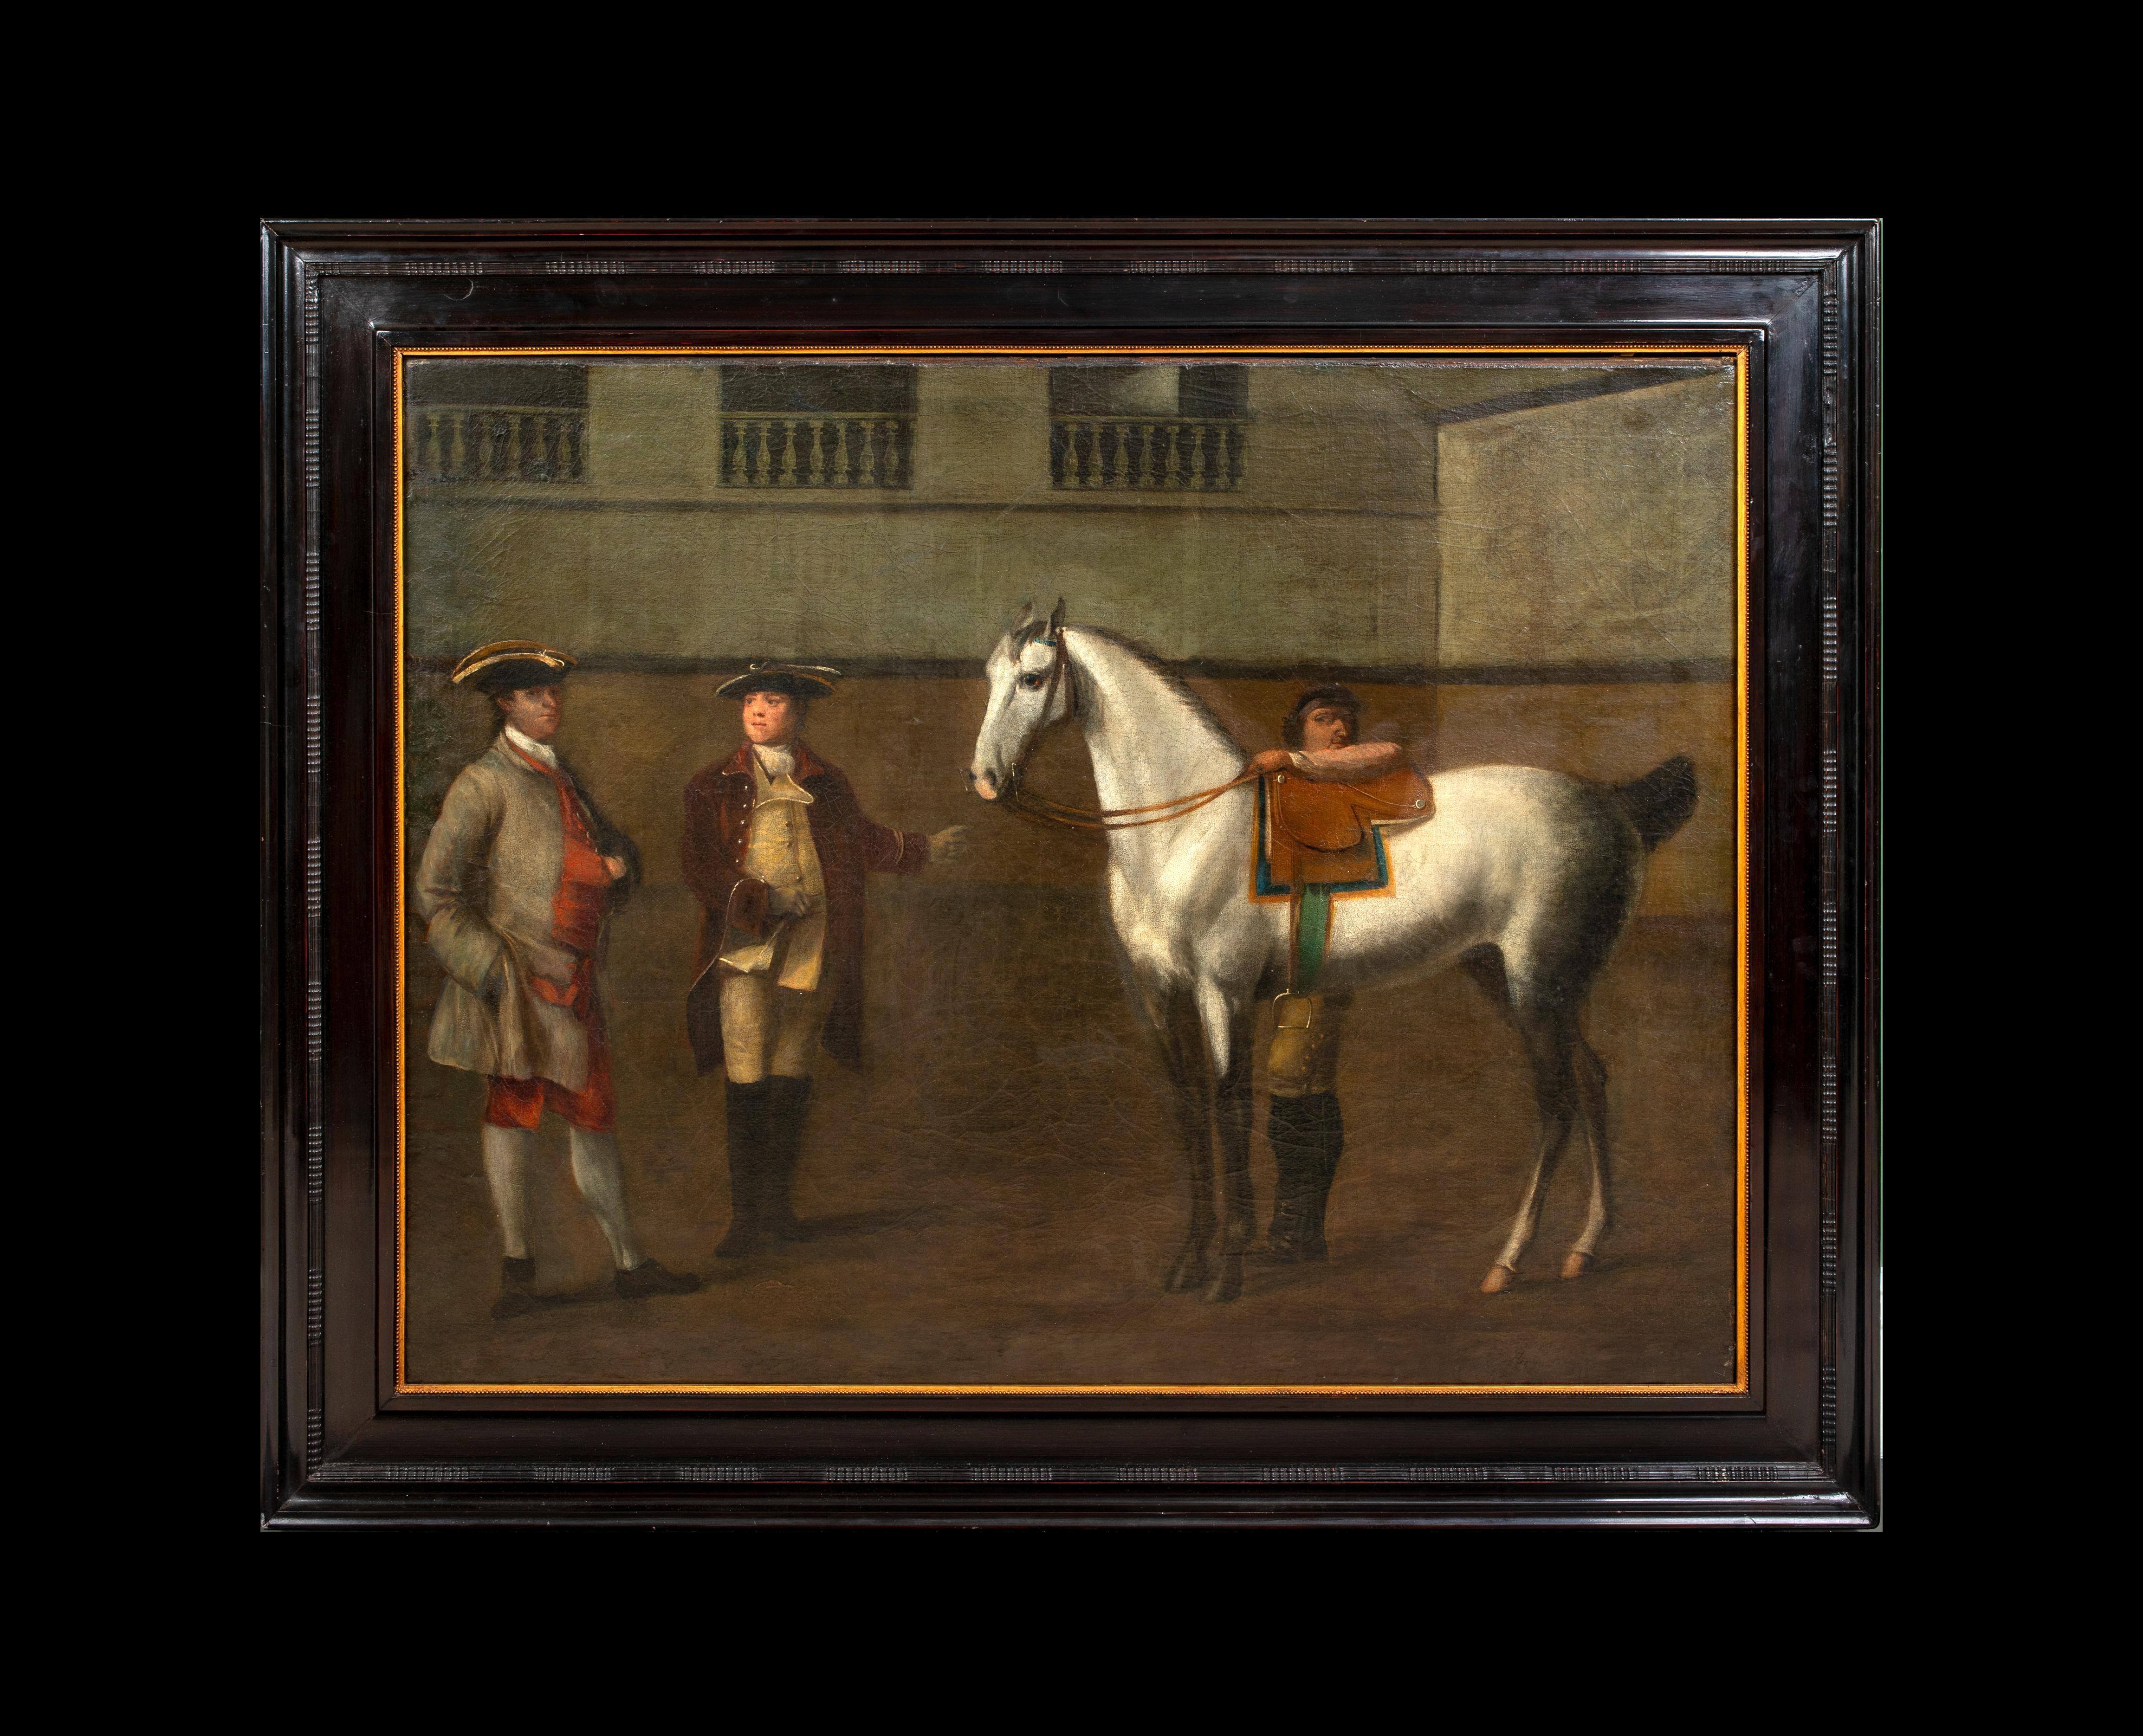 The Sale Of An Arabian Horse, 18th Century 

attributed to JOHN WOOTTON (1686-1746)

Large 18th Century early English equestrian scene of the sale of an Arabian horse between two gentlemen, oil on canvas attributed to John Wootton. Excellent quality